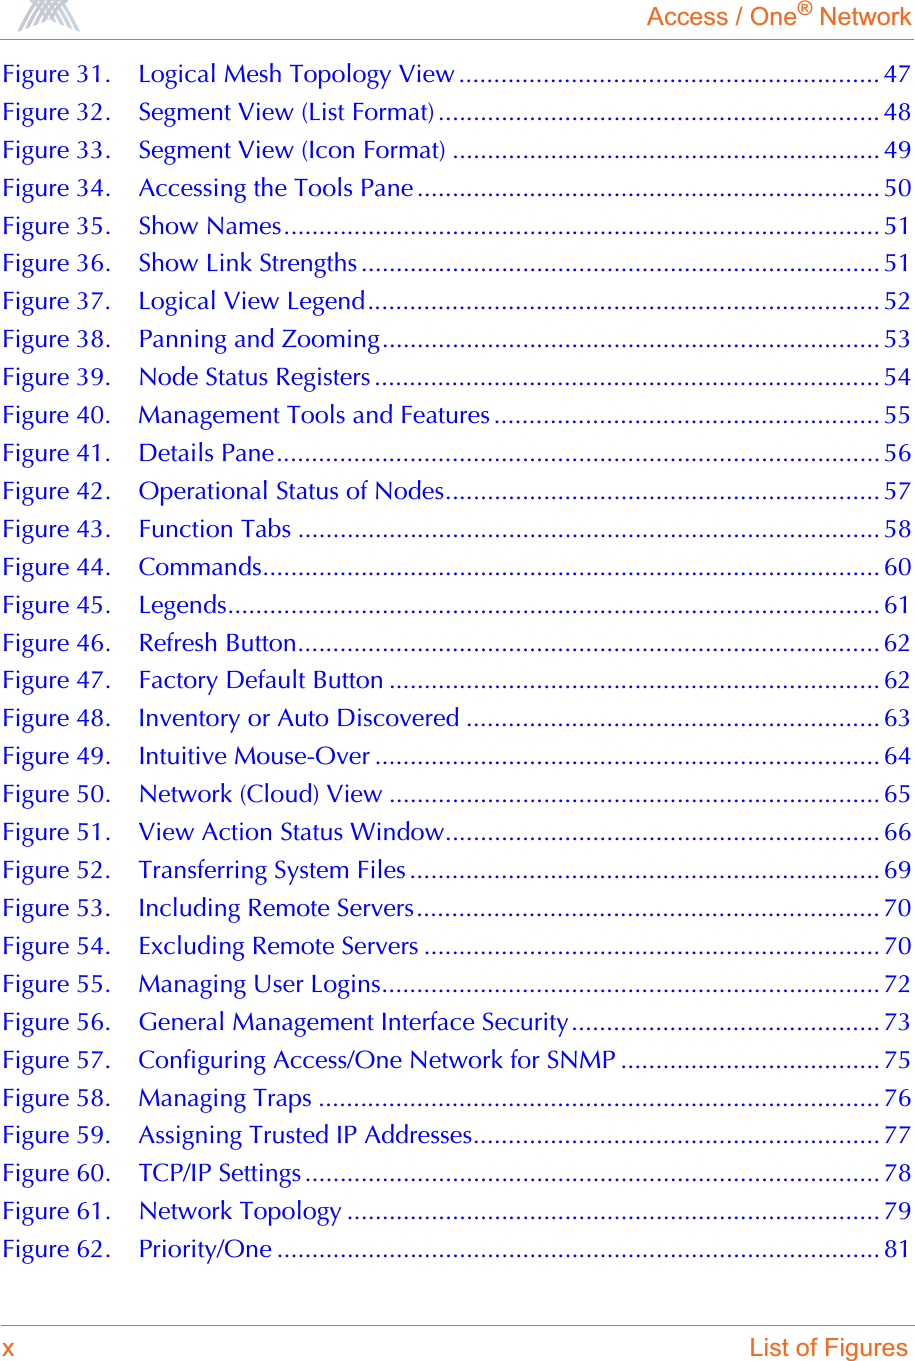 Access / One® Networkx List of FiguresFigure 31. Logical Mesh Topology View ............................................................ 47Figure 32. Segment View (List Format) ............................................................... 48Figure 33. Segment View (Icon Format) ............................................................. 49Figure 34. Accessing the Tools Pane .................................................................. 50Figure 35. Show Names..................................................................................... 51Figure 36. Show Link Strengths .......................................................................... 51Figure 37. Logical View Legend......................................................................... 52Figure 38. Panning and Zooming....................................................................... 53Figure 39. Node Status Registers ........................................................................ 54Figure 40. Management Tools and Features ....................................................... 55Figure 41. Details Pane...................................................................................... 56Figure 42. Operational Status of Nodes.............................................................. 57Figure 43. Function Tabs ................................................................................... 58Figure 44. Commands........................................................................................ 60Figure 45. Legends............................................................................................. 61Figure 46. Refresh Button................................................................................... 62Figure 47. Factory Default Button ...................................................................... 62Figure 48. Inventory or Auto Discovered ........................................................... 63Figure 49. Intuitive Mouse-Over ........................................................................ 64Figure 50. Network (Cloud) View ...................................................................... 65Figure 51. View Action Status Window.............................................................. 66Figure 52. Transferring System Files ................................................................... 69Figure 53. Including Remote Servers.................................................................. 70Figure 54. Excluding Remote Servers ................................................................. 70Figure 55. Managing User Logins....................................................................... 72Figure 56. General Management Interface Security............................................ 73Figure 57. Configuring Access/One Network for SNMP ..................................... 75Figure 58. Managing Traps ................................................................................ 76Figure 59. Assigning Trusted IP Addresses.......................................................... 77Figure 60. TCP/IP Settings .................................................................................. 78Figure 61. Network Topology ............................................................................ 79Figure 62. Priority/One ...................................................................................... 81